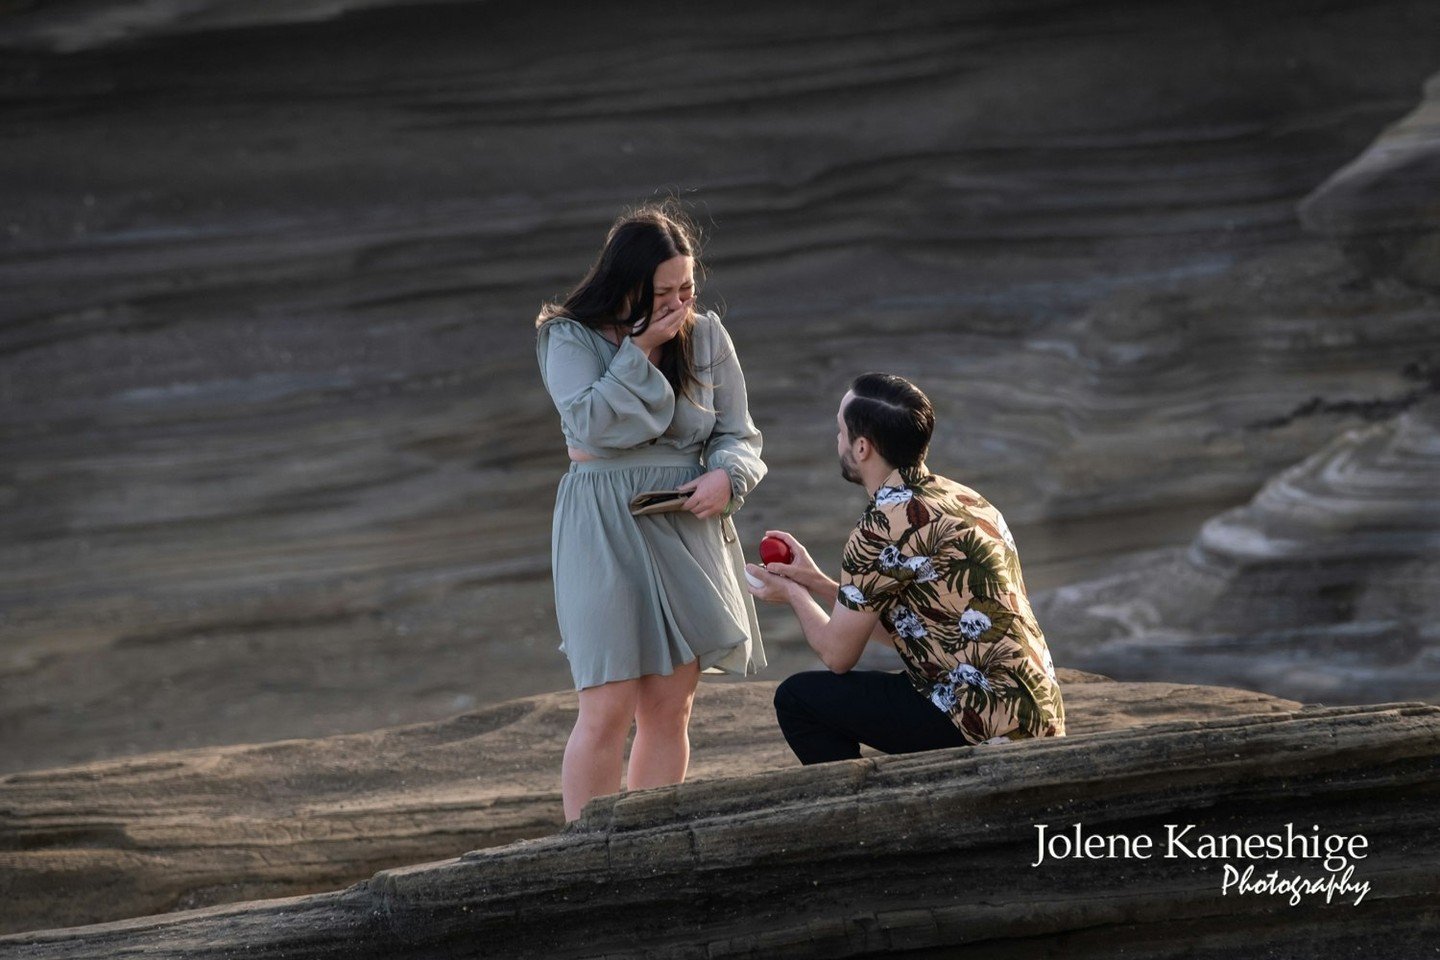 Experience the thrill of a breath taking cliffside proposal with every moment captured with precision and artistry. 

#SheSaidYes #surpriseproposal #hawaiiproposal #oahuproposal #engagementphotographer #proposalphotography #secretengagement #willyoum